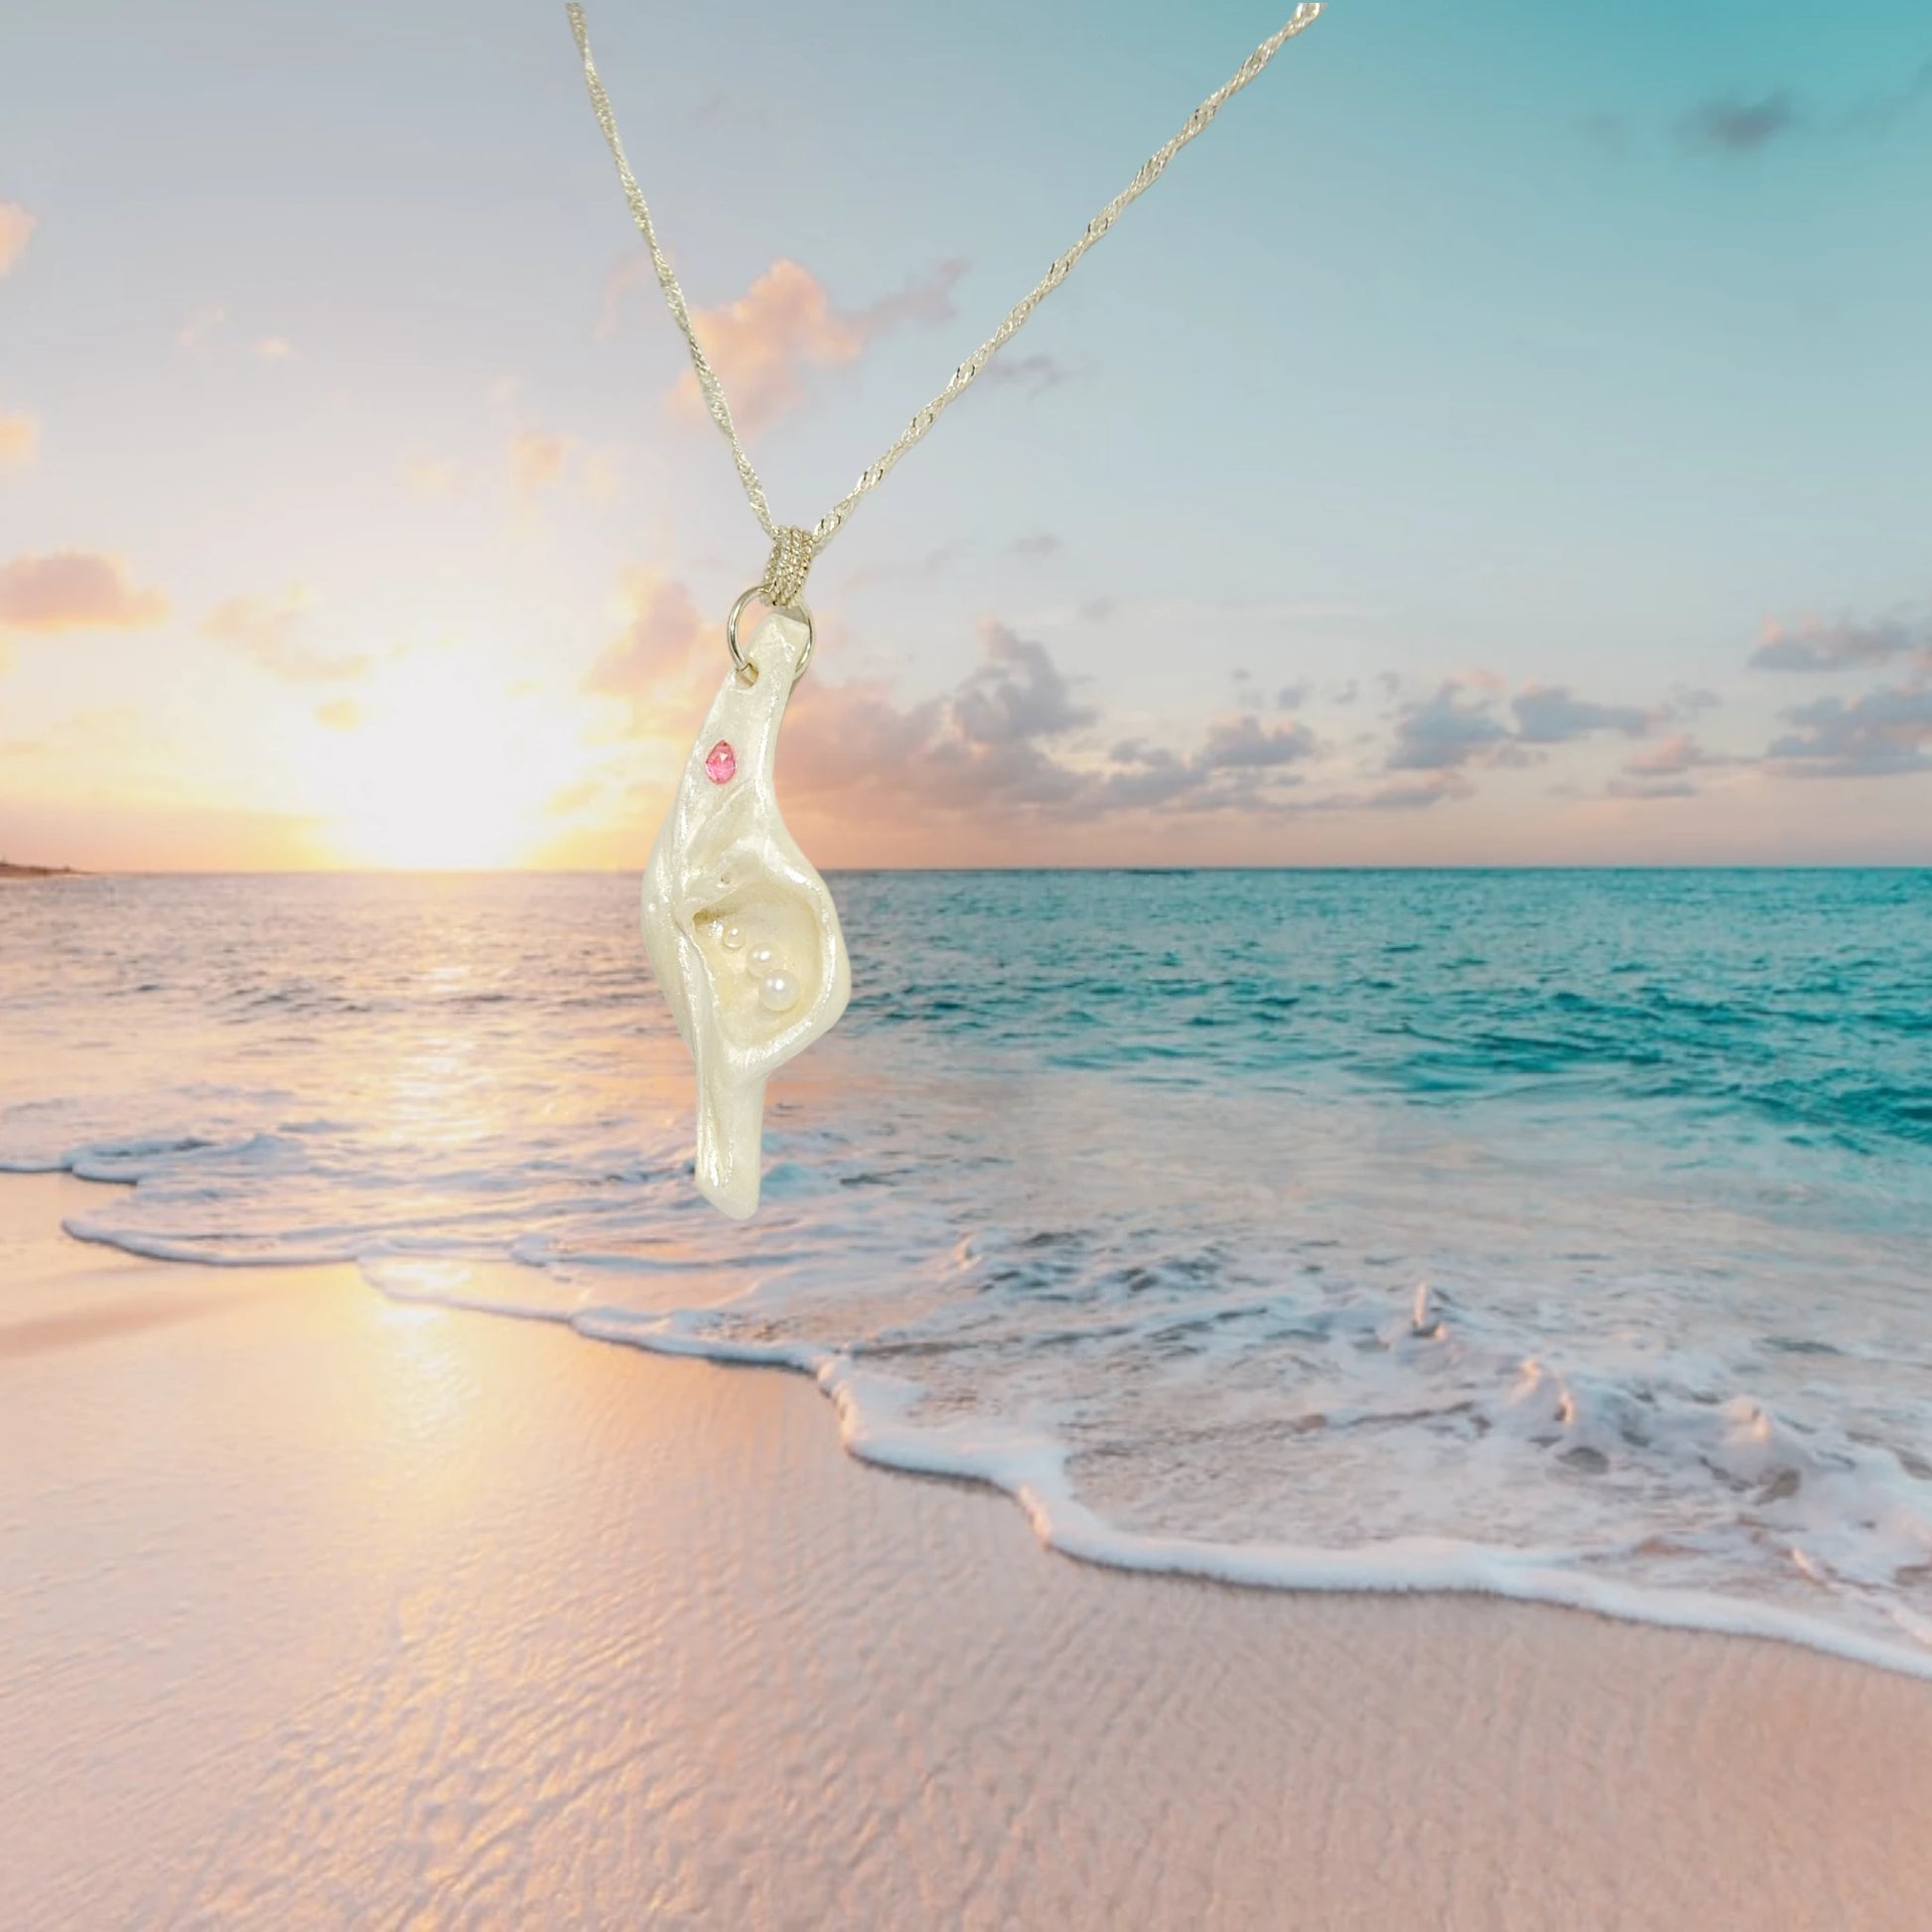 A trio of white baby freshwater pearls and a teardrop rose cut pink tourmaline gemstone compliments the seashell pendant beautifully. The pendant is hanging on a chain with a beautiful sunrise over the ocean in the background.